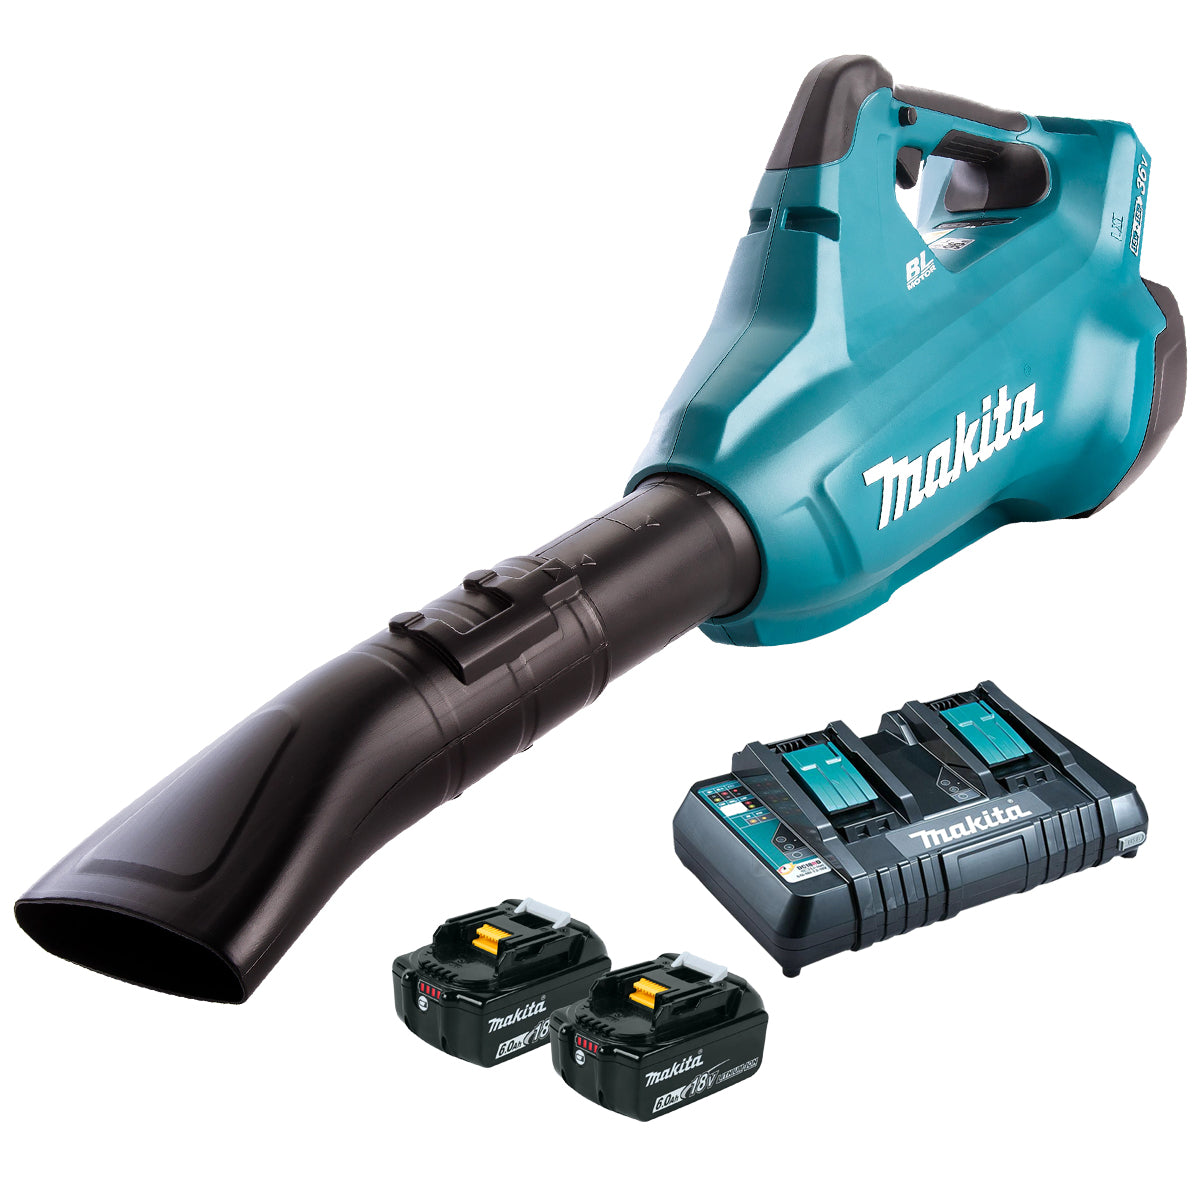 Makita DUB362PG2 36V Brushless Leaf Blower with 2 x 6.0Ah Batteries & Charger